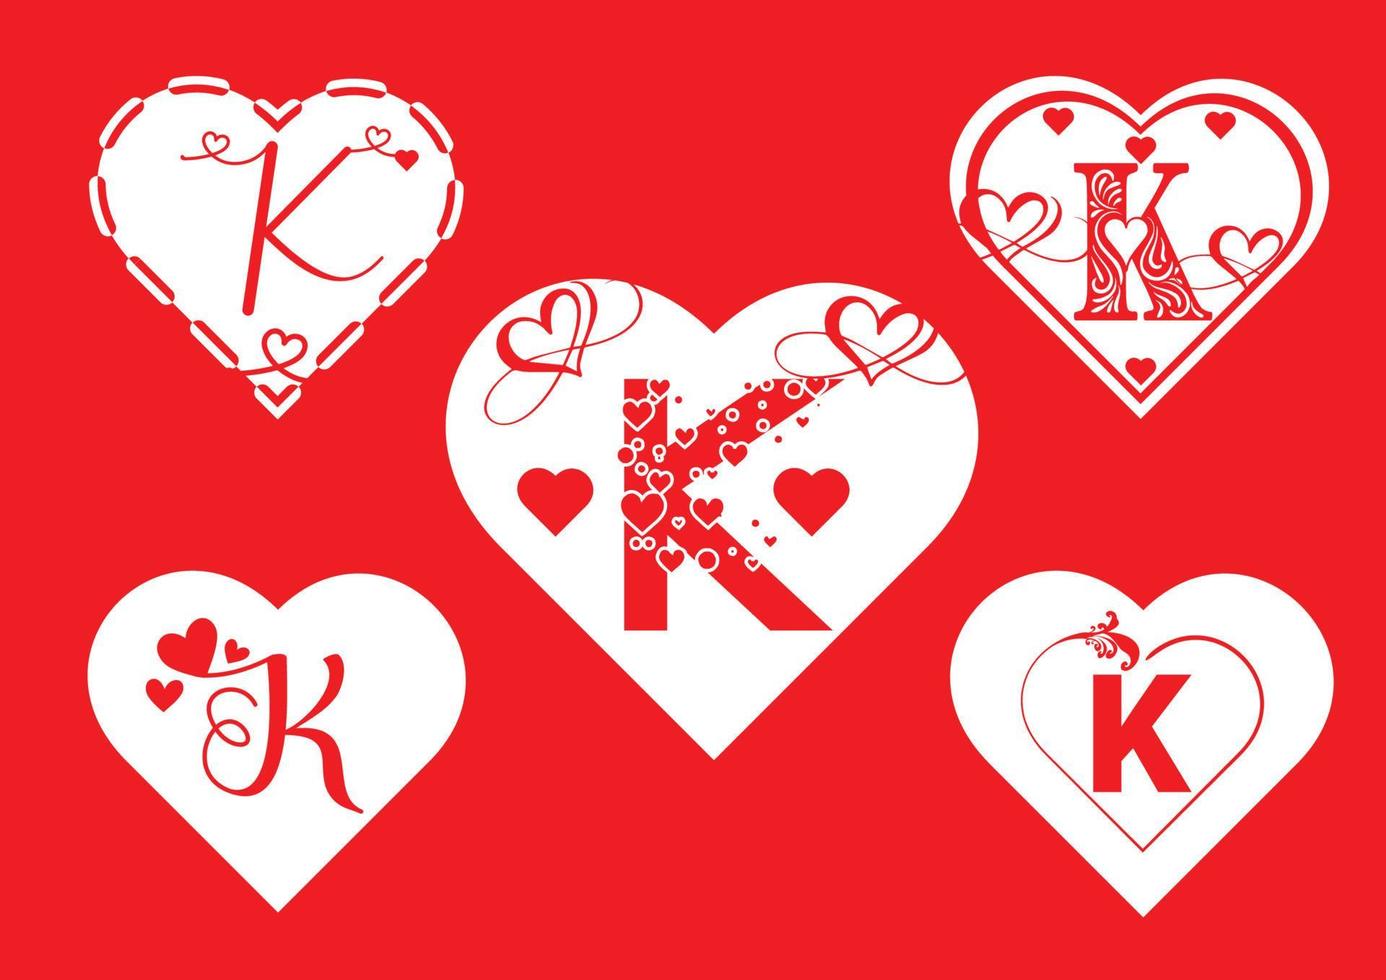 K letter logo with love icon, valentines day design template ...